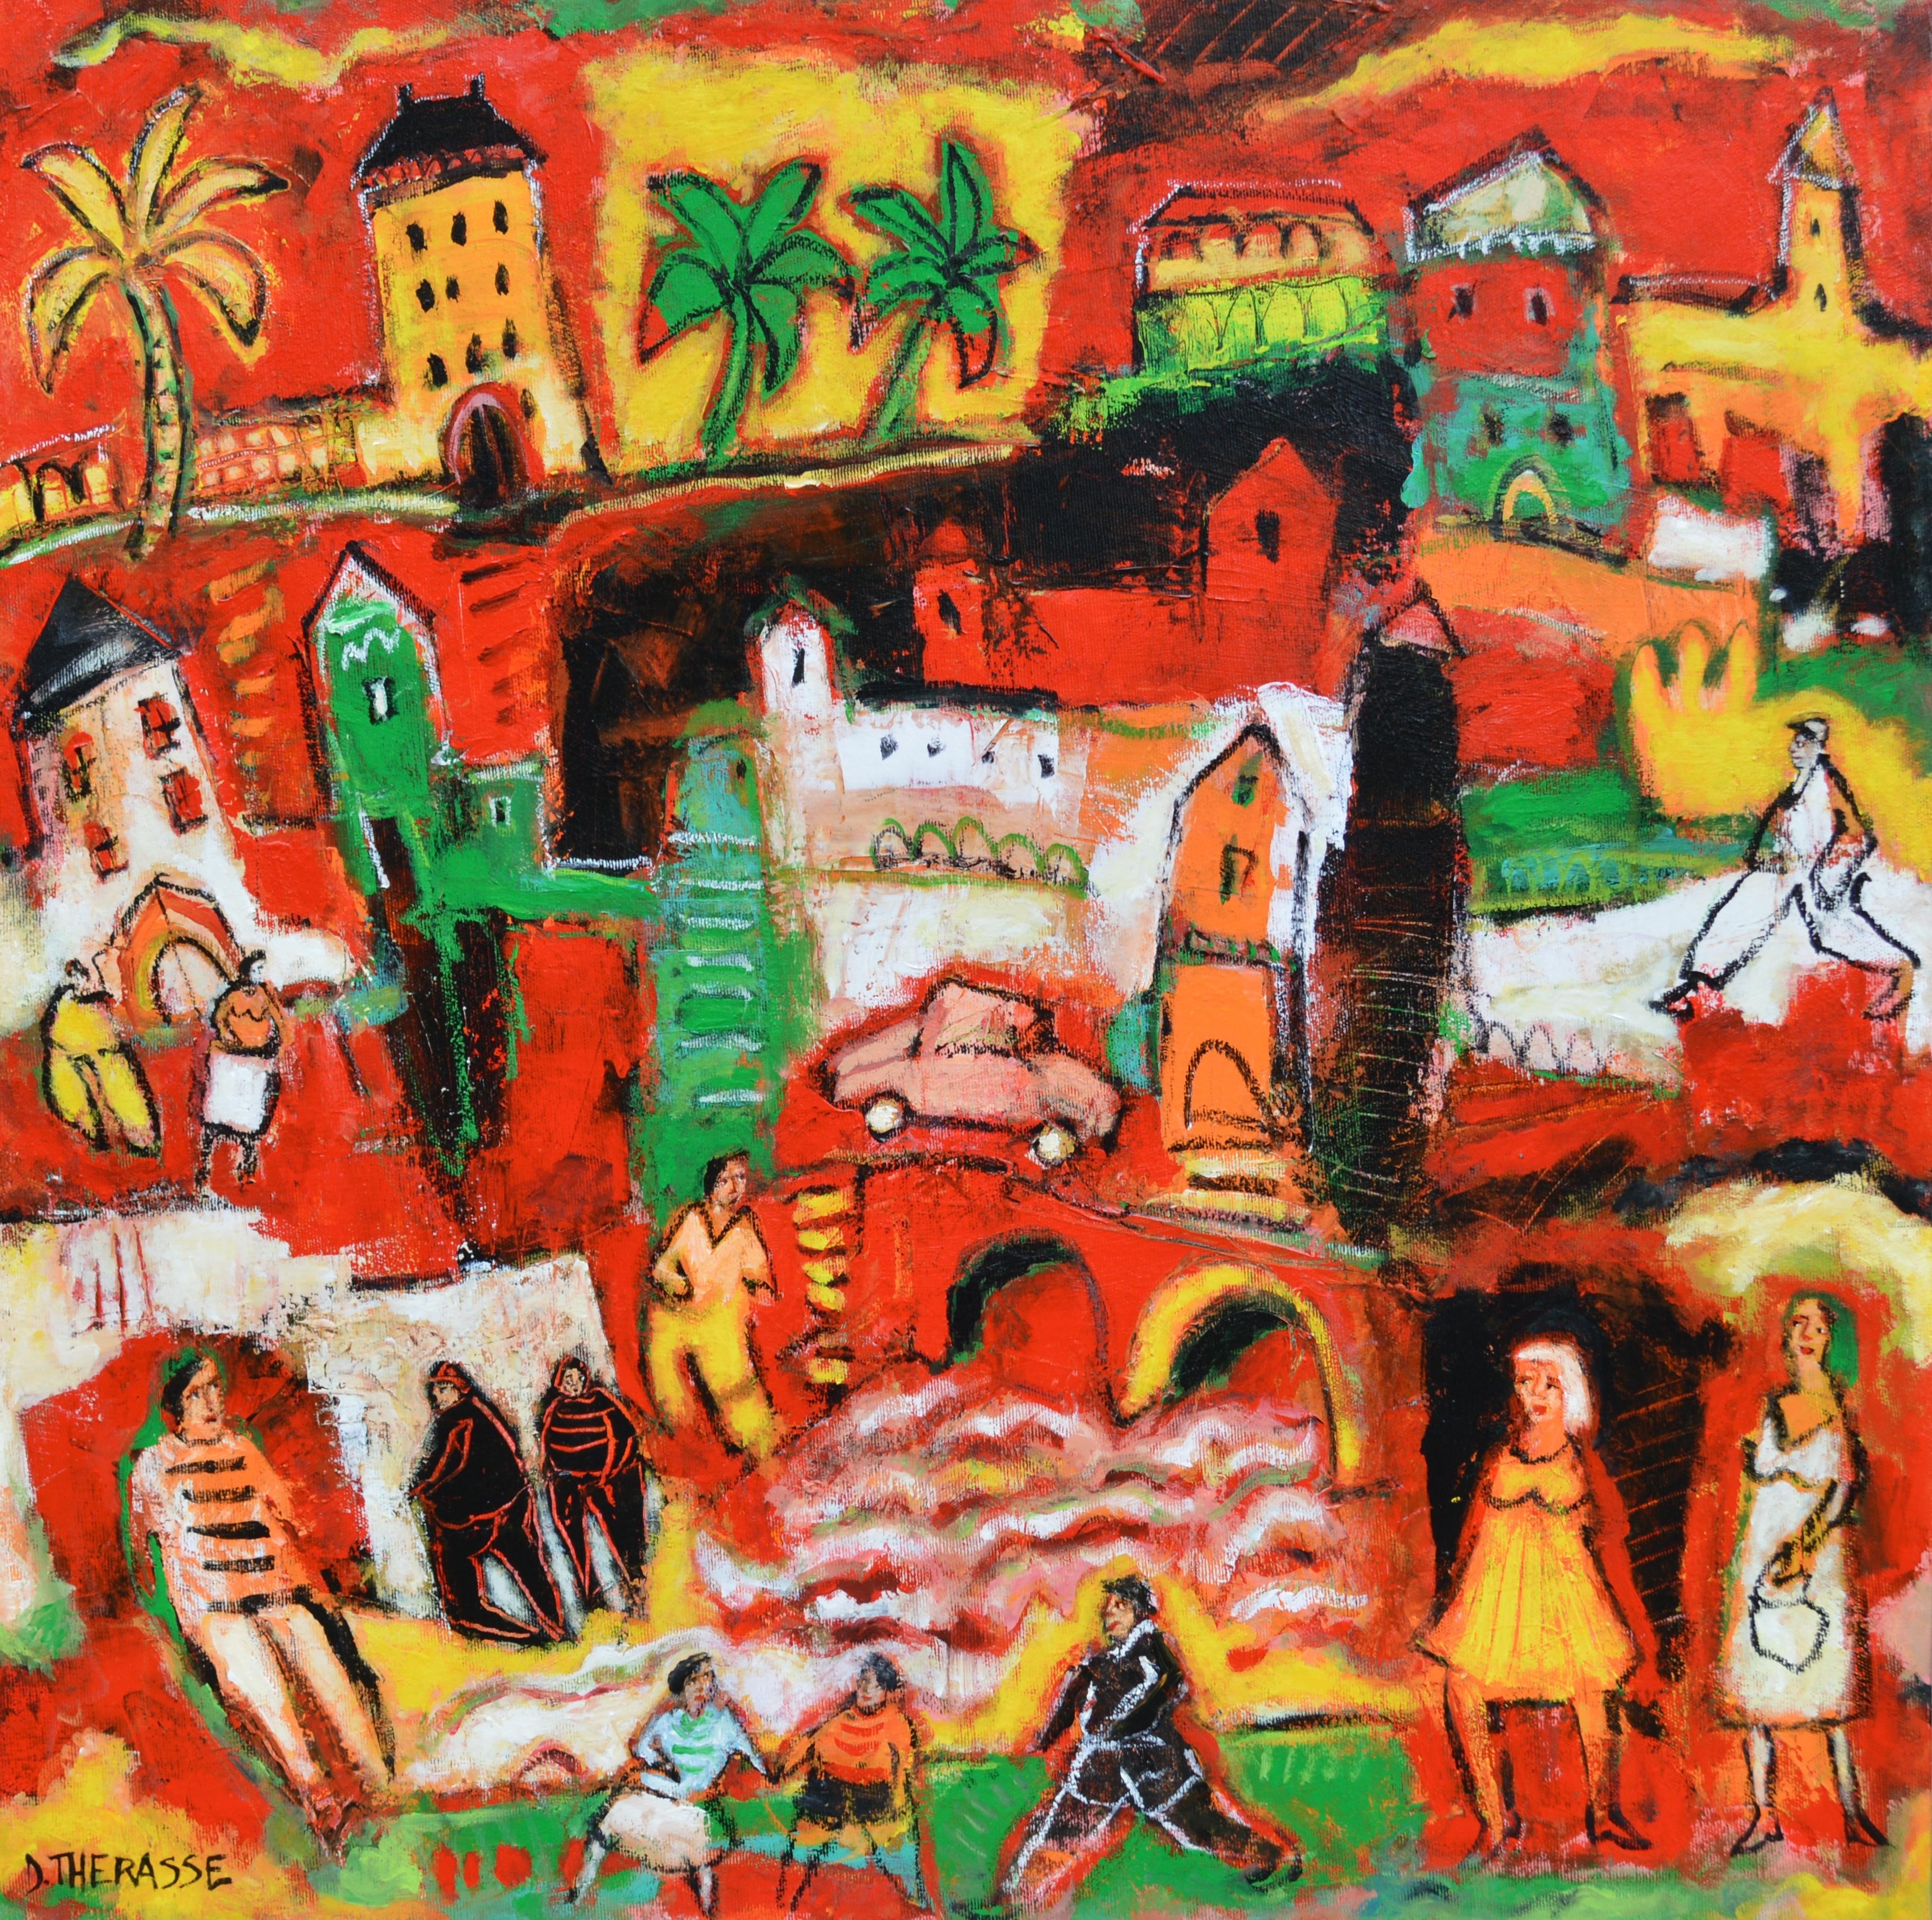 Daniel Thérasse Figurative Painting - "The City with Green Palms", Red Yellow Towers Poetic Figuration Painting 